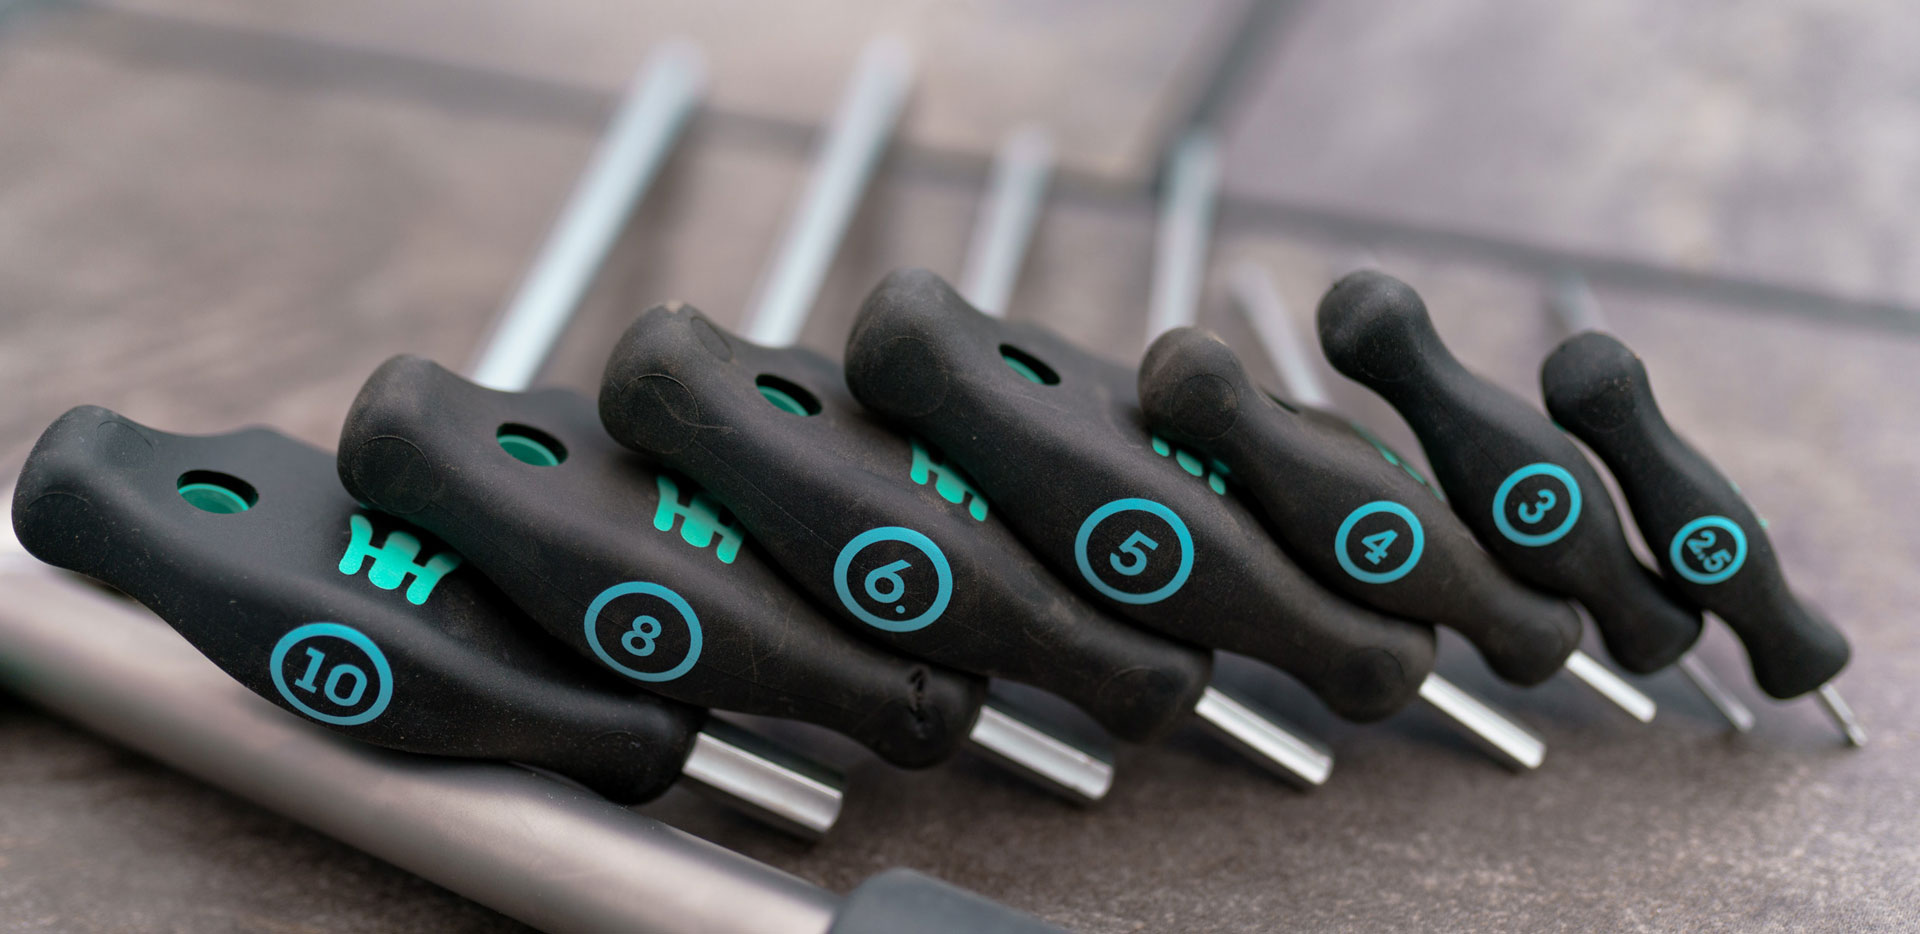 Wera T-Handle Hex-Plus Toolset Review